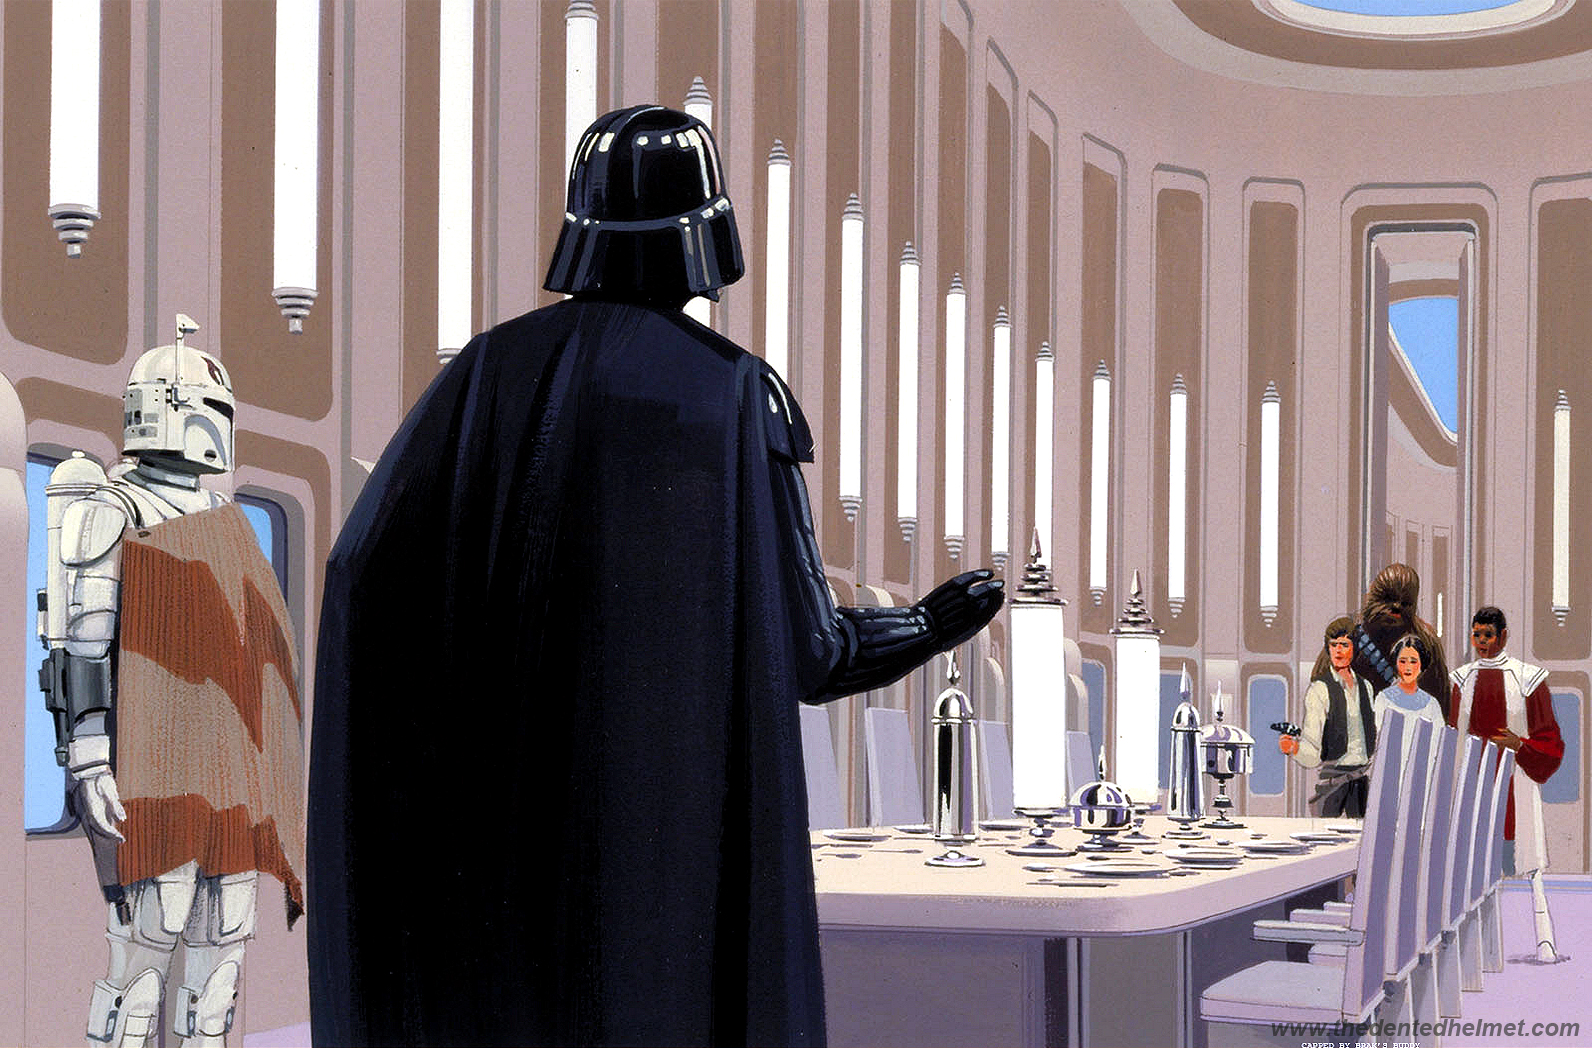 Boba Fett Concept Painting by Ralph McQuarrie